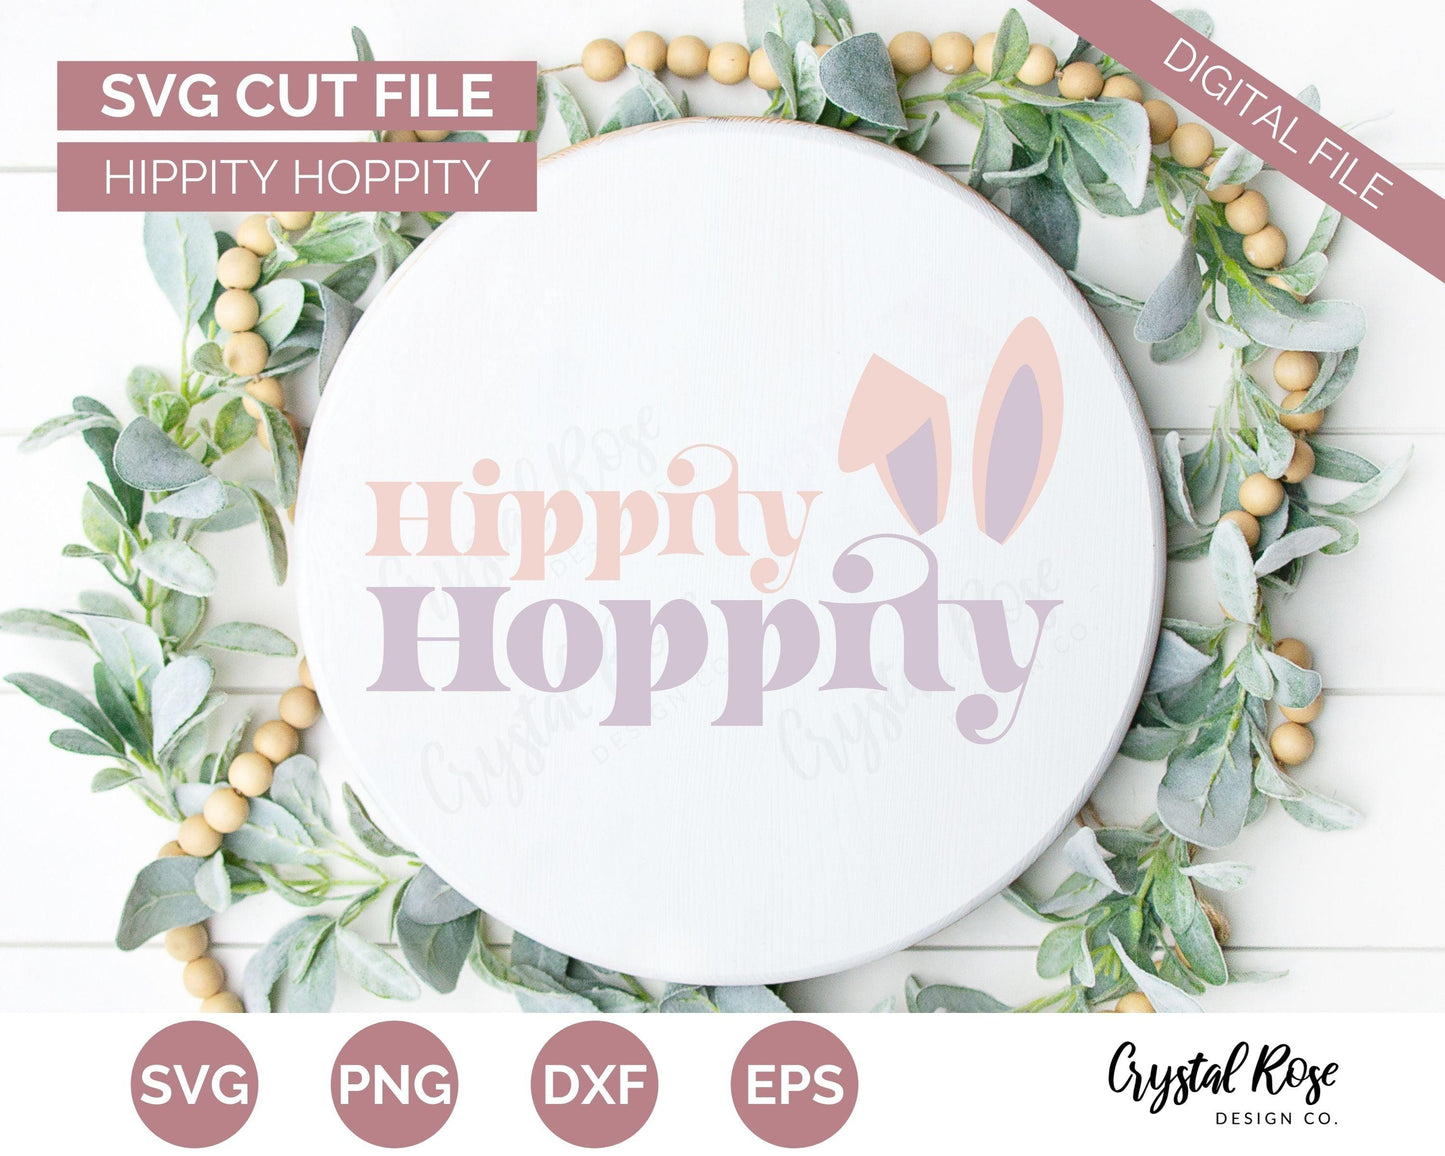 Hippity Hoppity SVG, Easter SVG, Digital Download, Cricut, Silhouette, Glowforge (includes svg/png/dxf/eps)